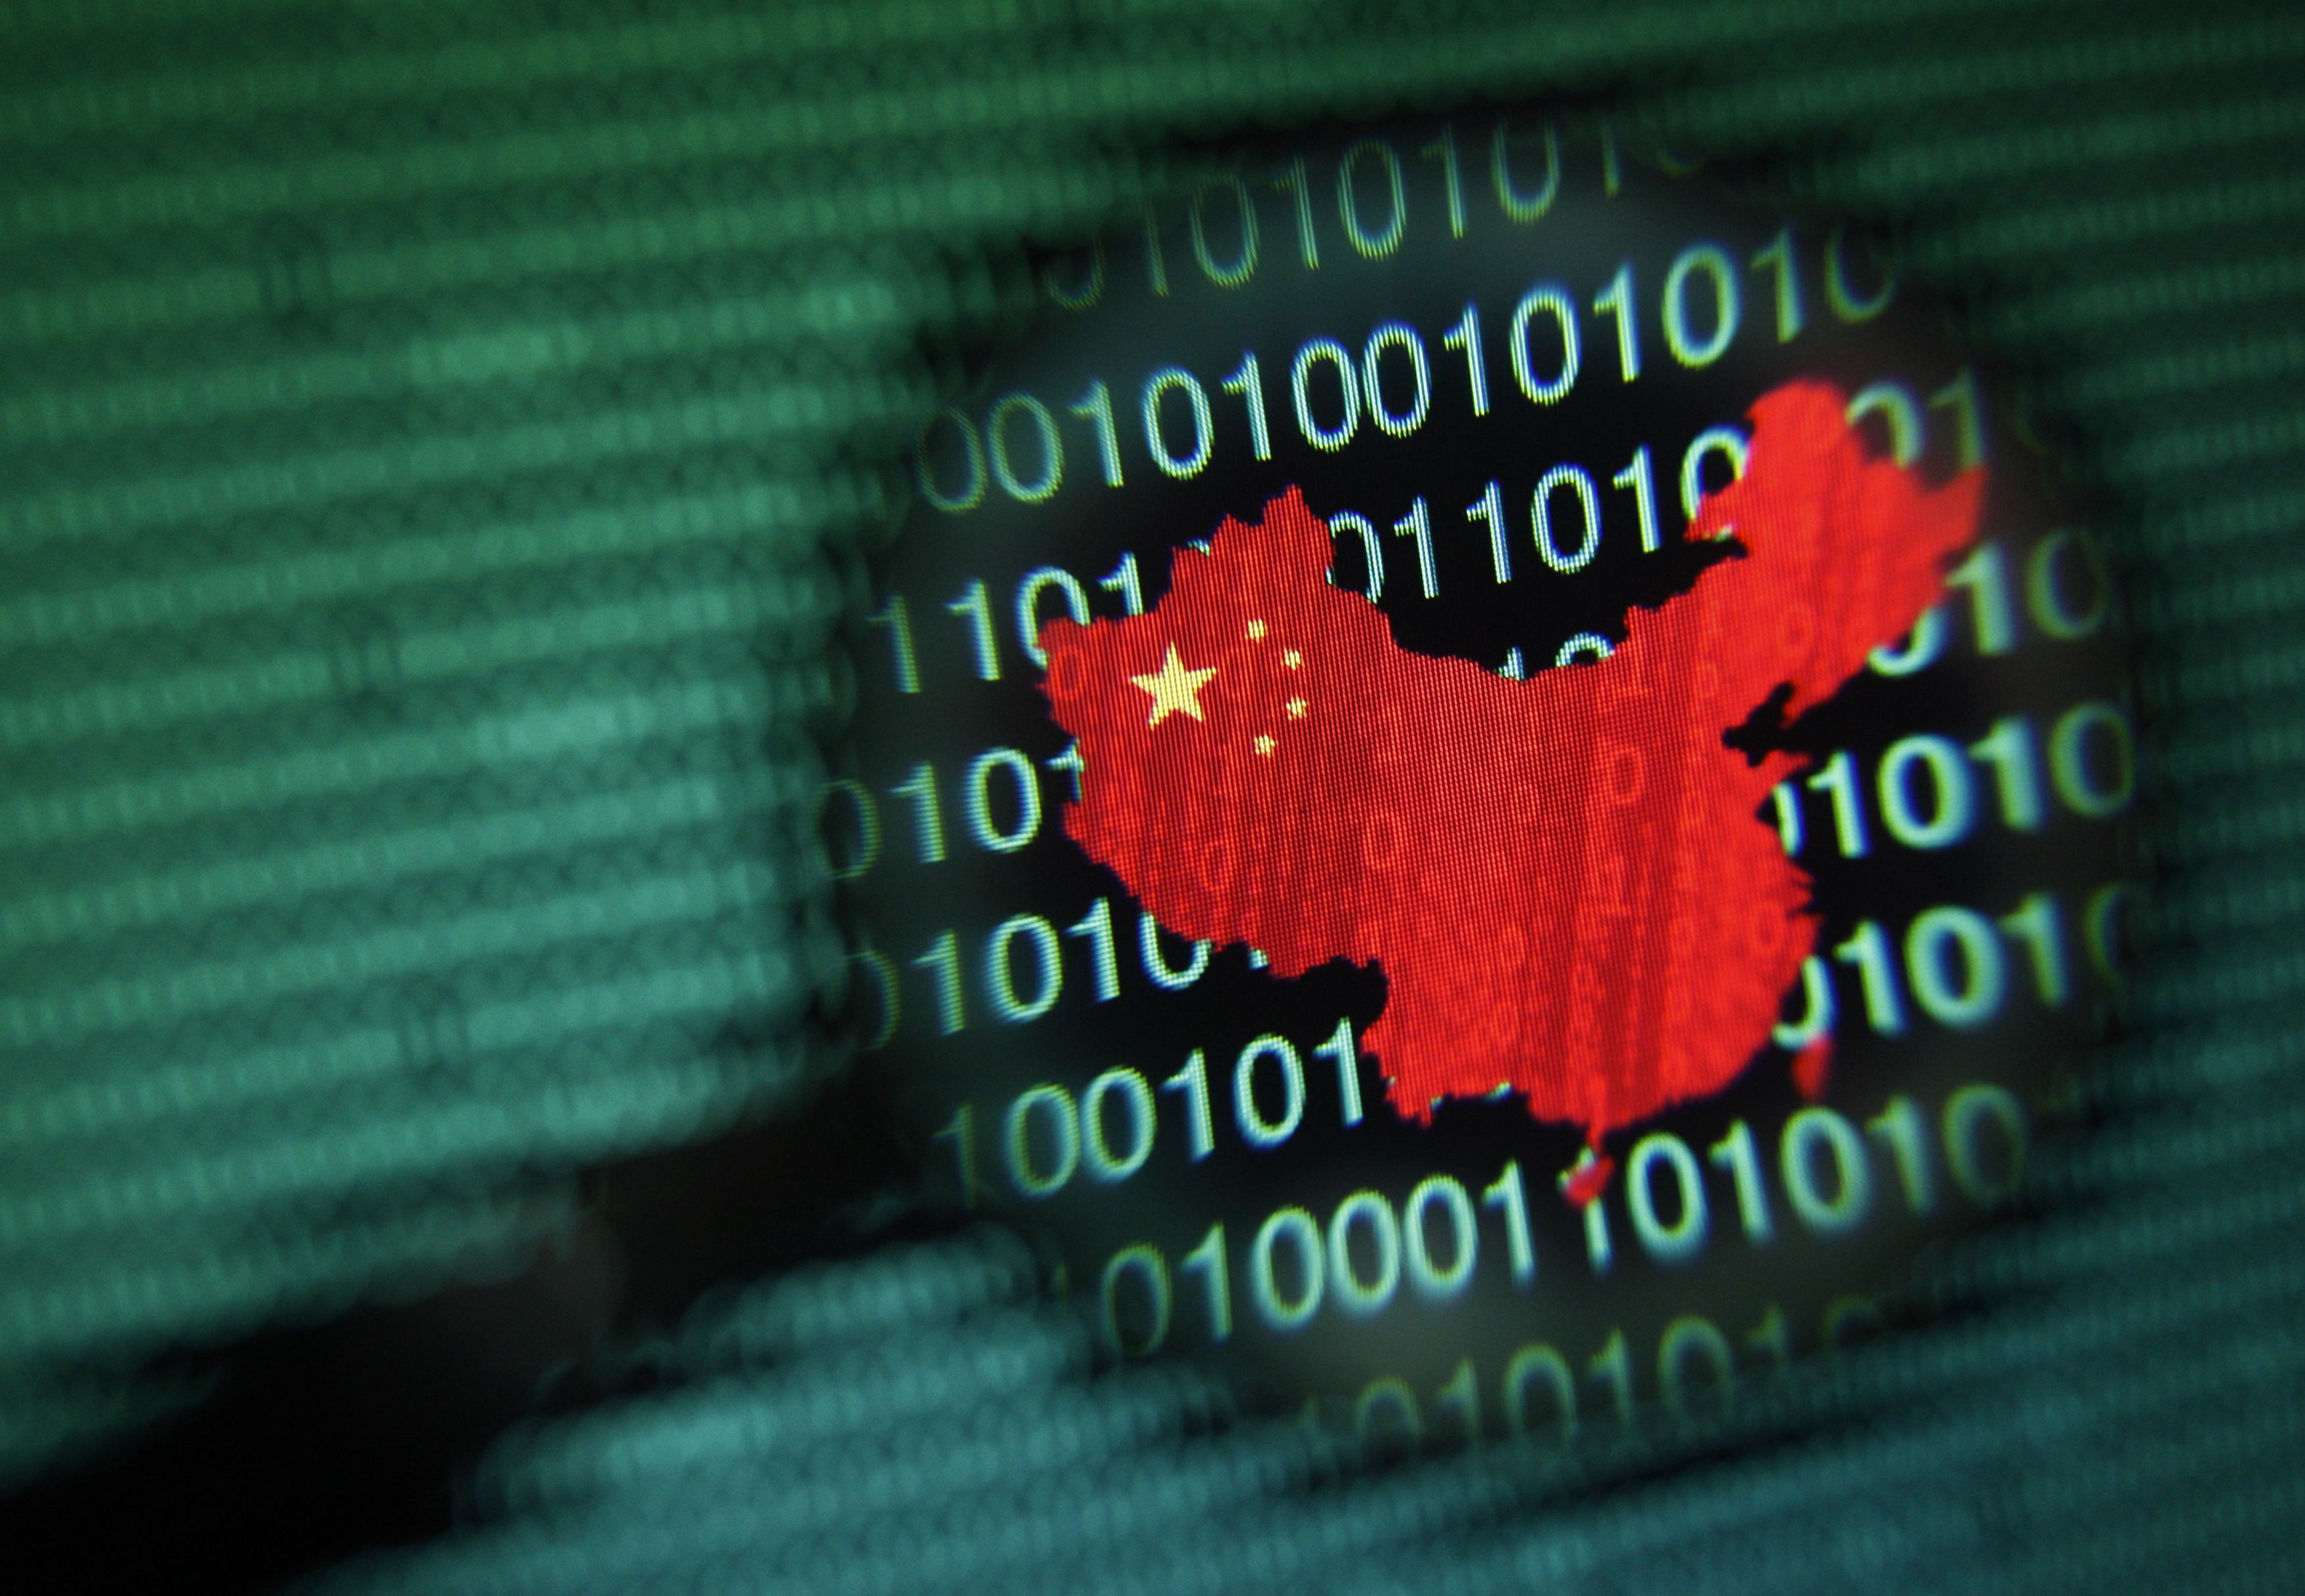 The Cybersecurity Law will apply to any company dealing with China – and infringing it can get you fined, detained, or even imprisoned